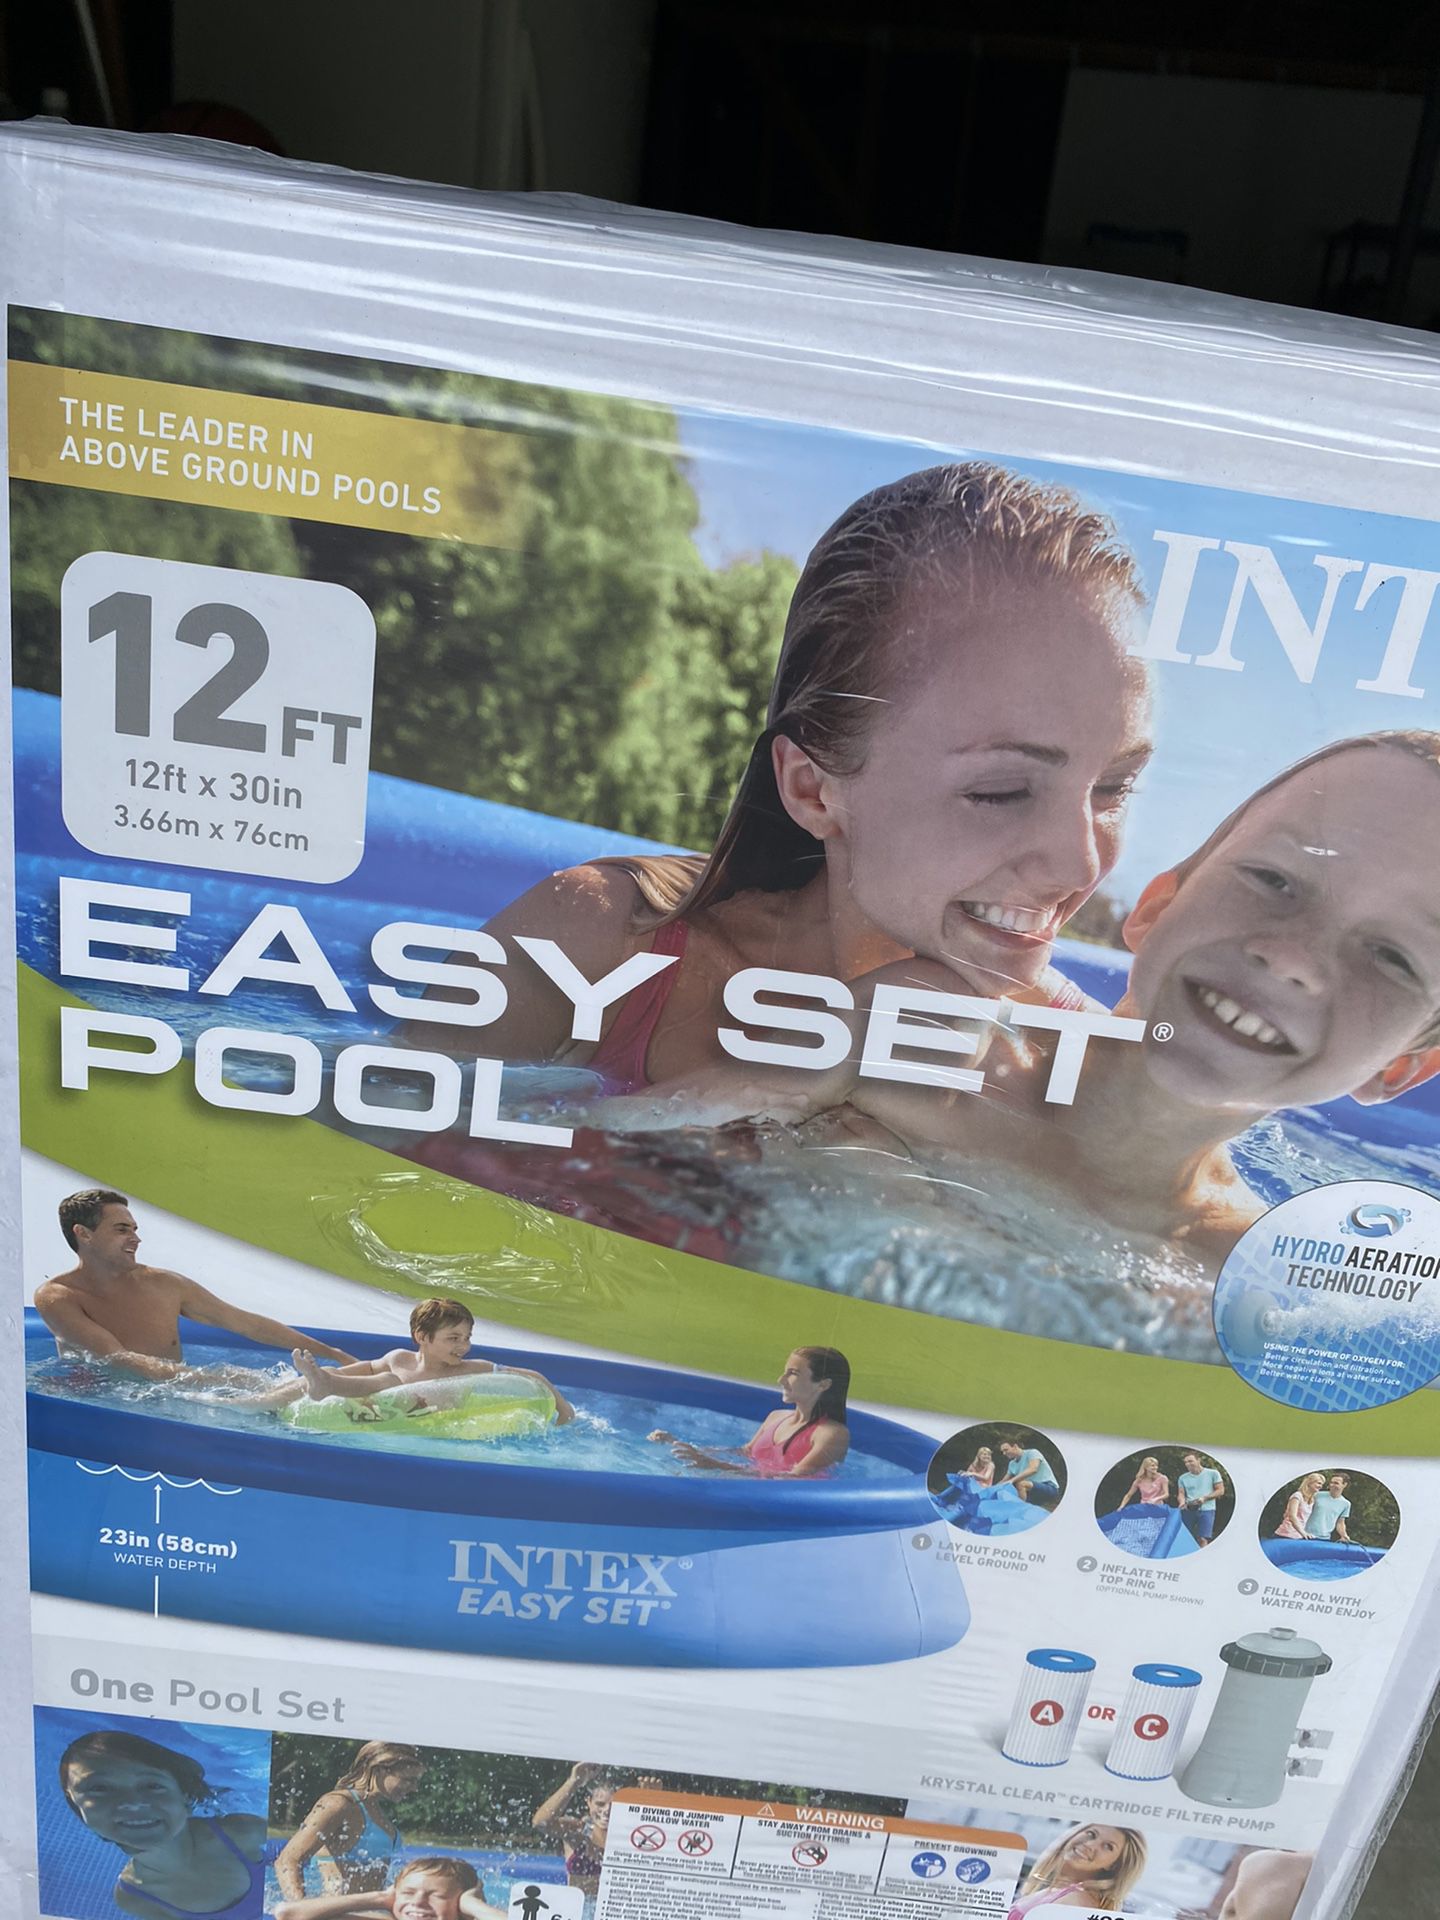 BRAND NEW INTEX EASY SET 12ft x 30in Above Ground Swimming Pool w/ Pump & Filter